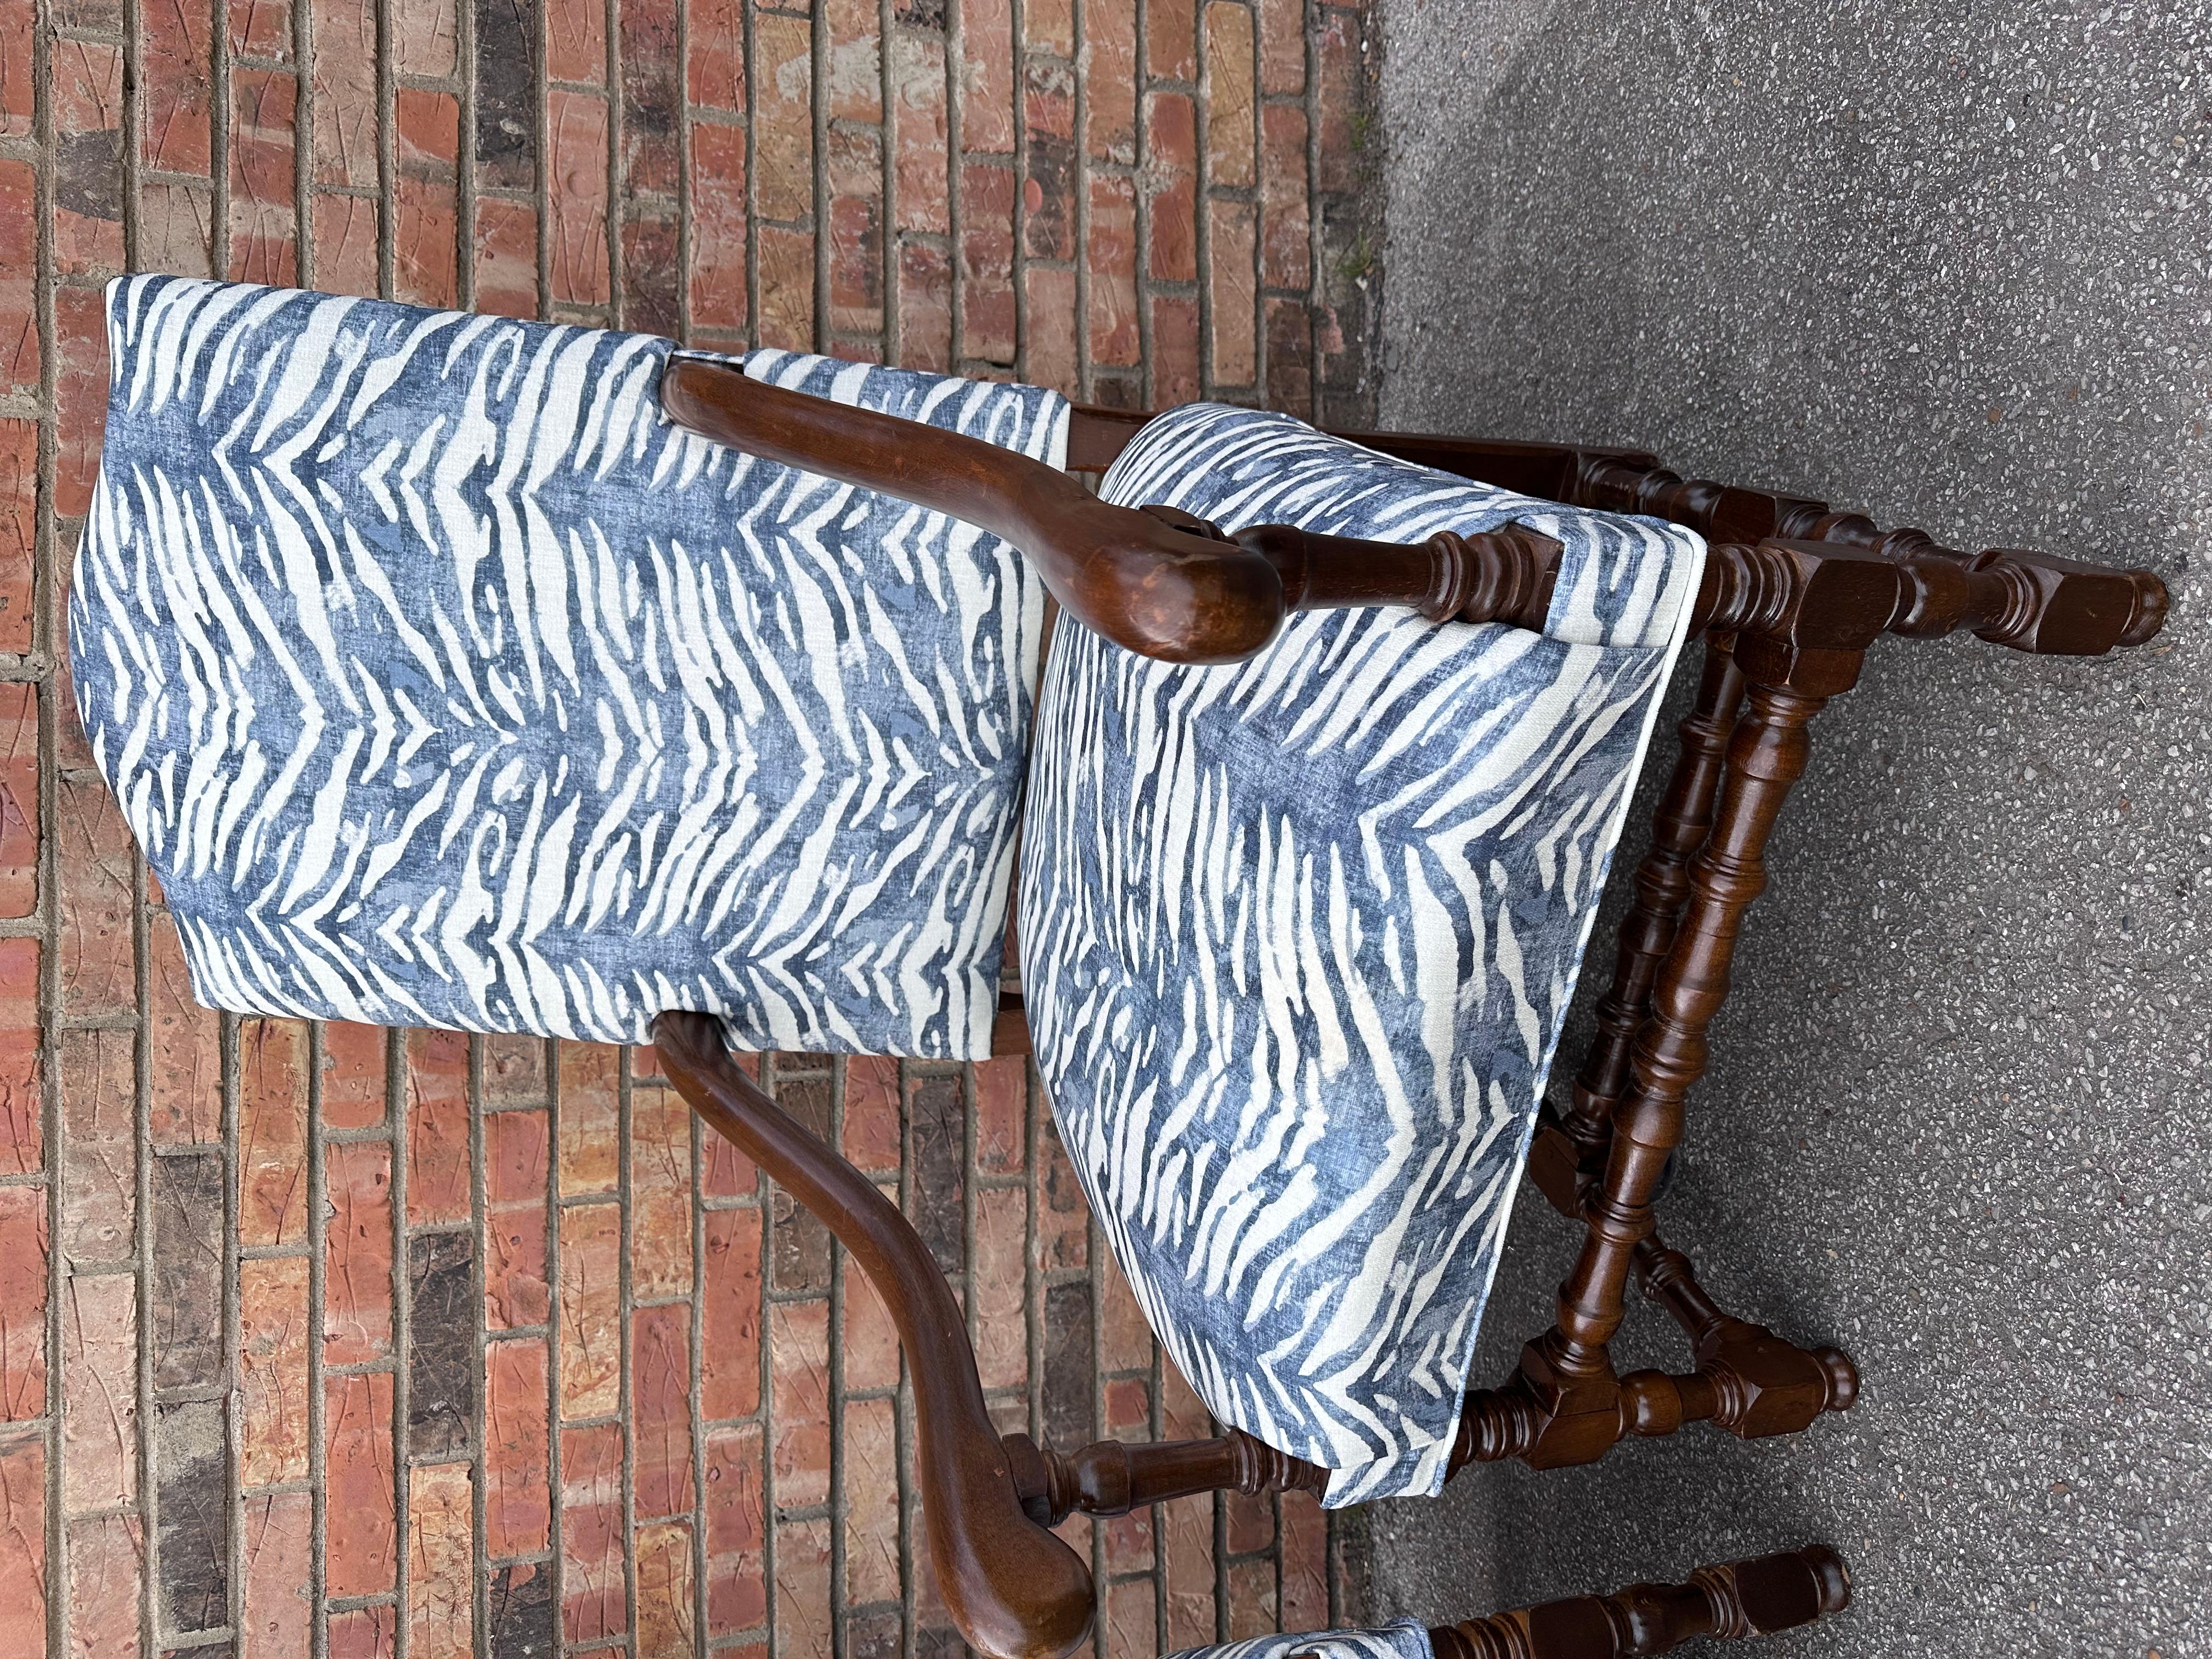 Old meets new, in this beautiful pairing of antique frames with this new fabric. The dark aged wood has beautiful turning detail on the legs, and the arms are smoothly curved with excellent patina. The fabric is a modern striped style blue and white